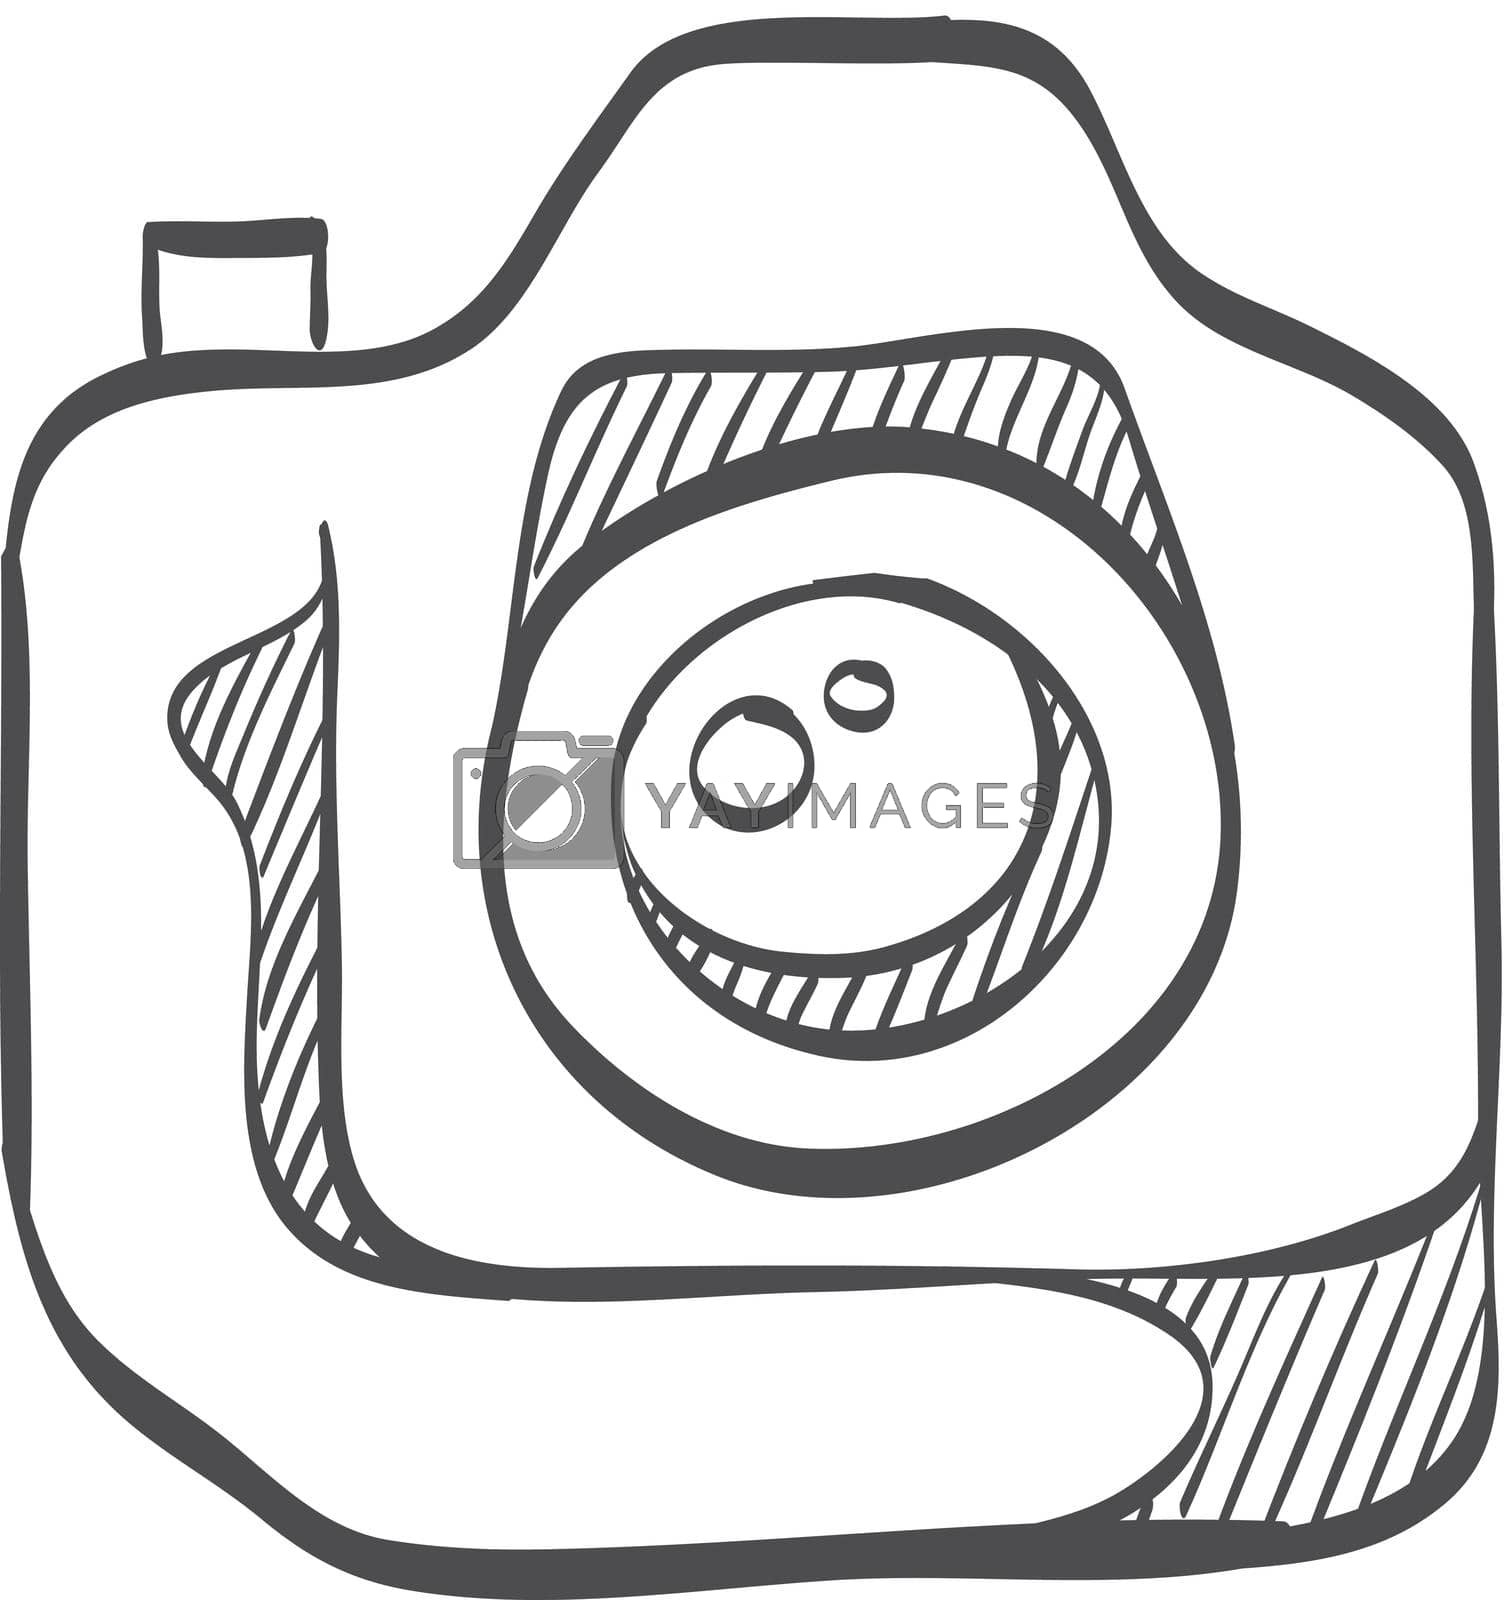 Royalty free image of Sketch icon - Camera by puruan